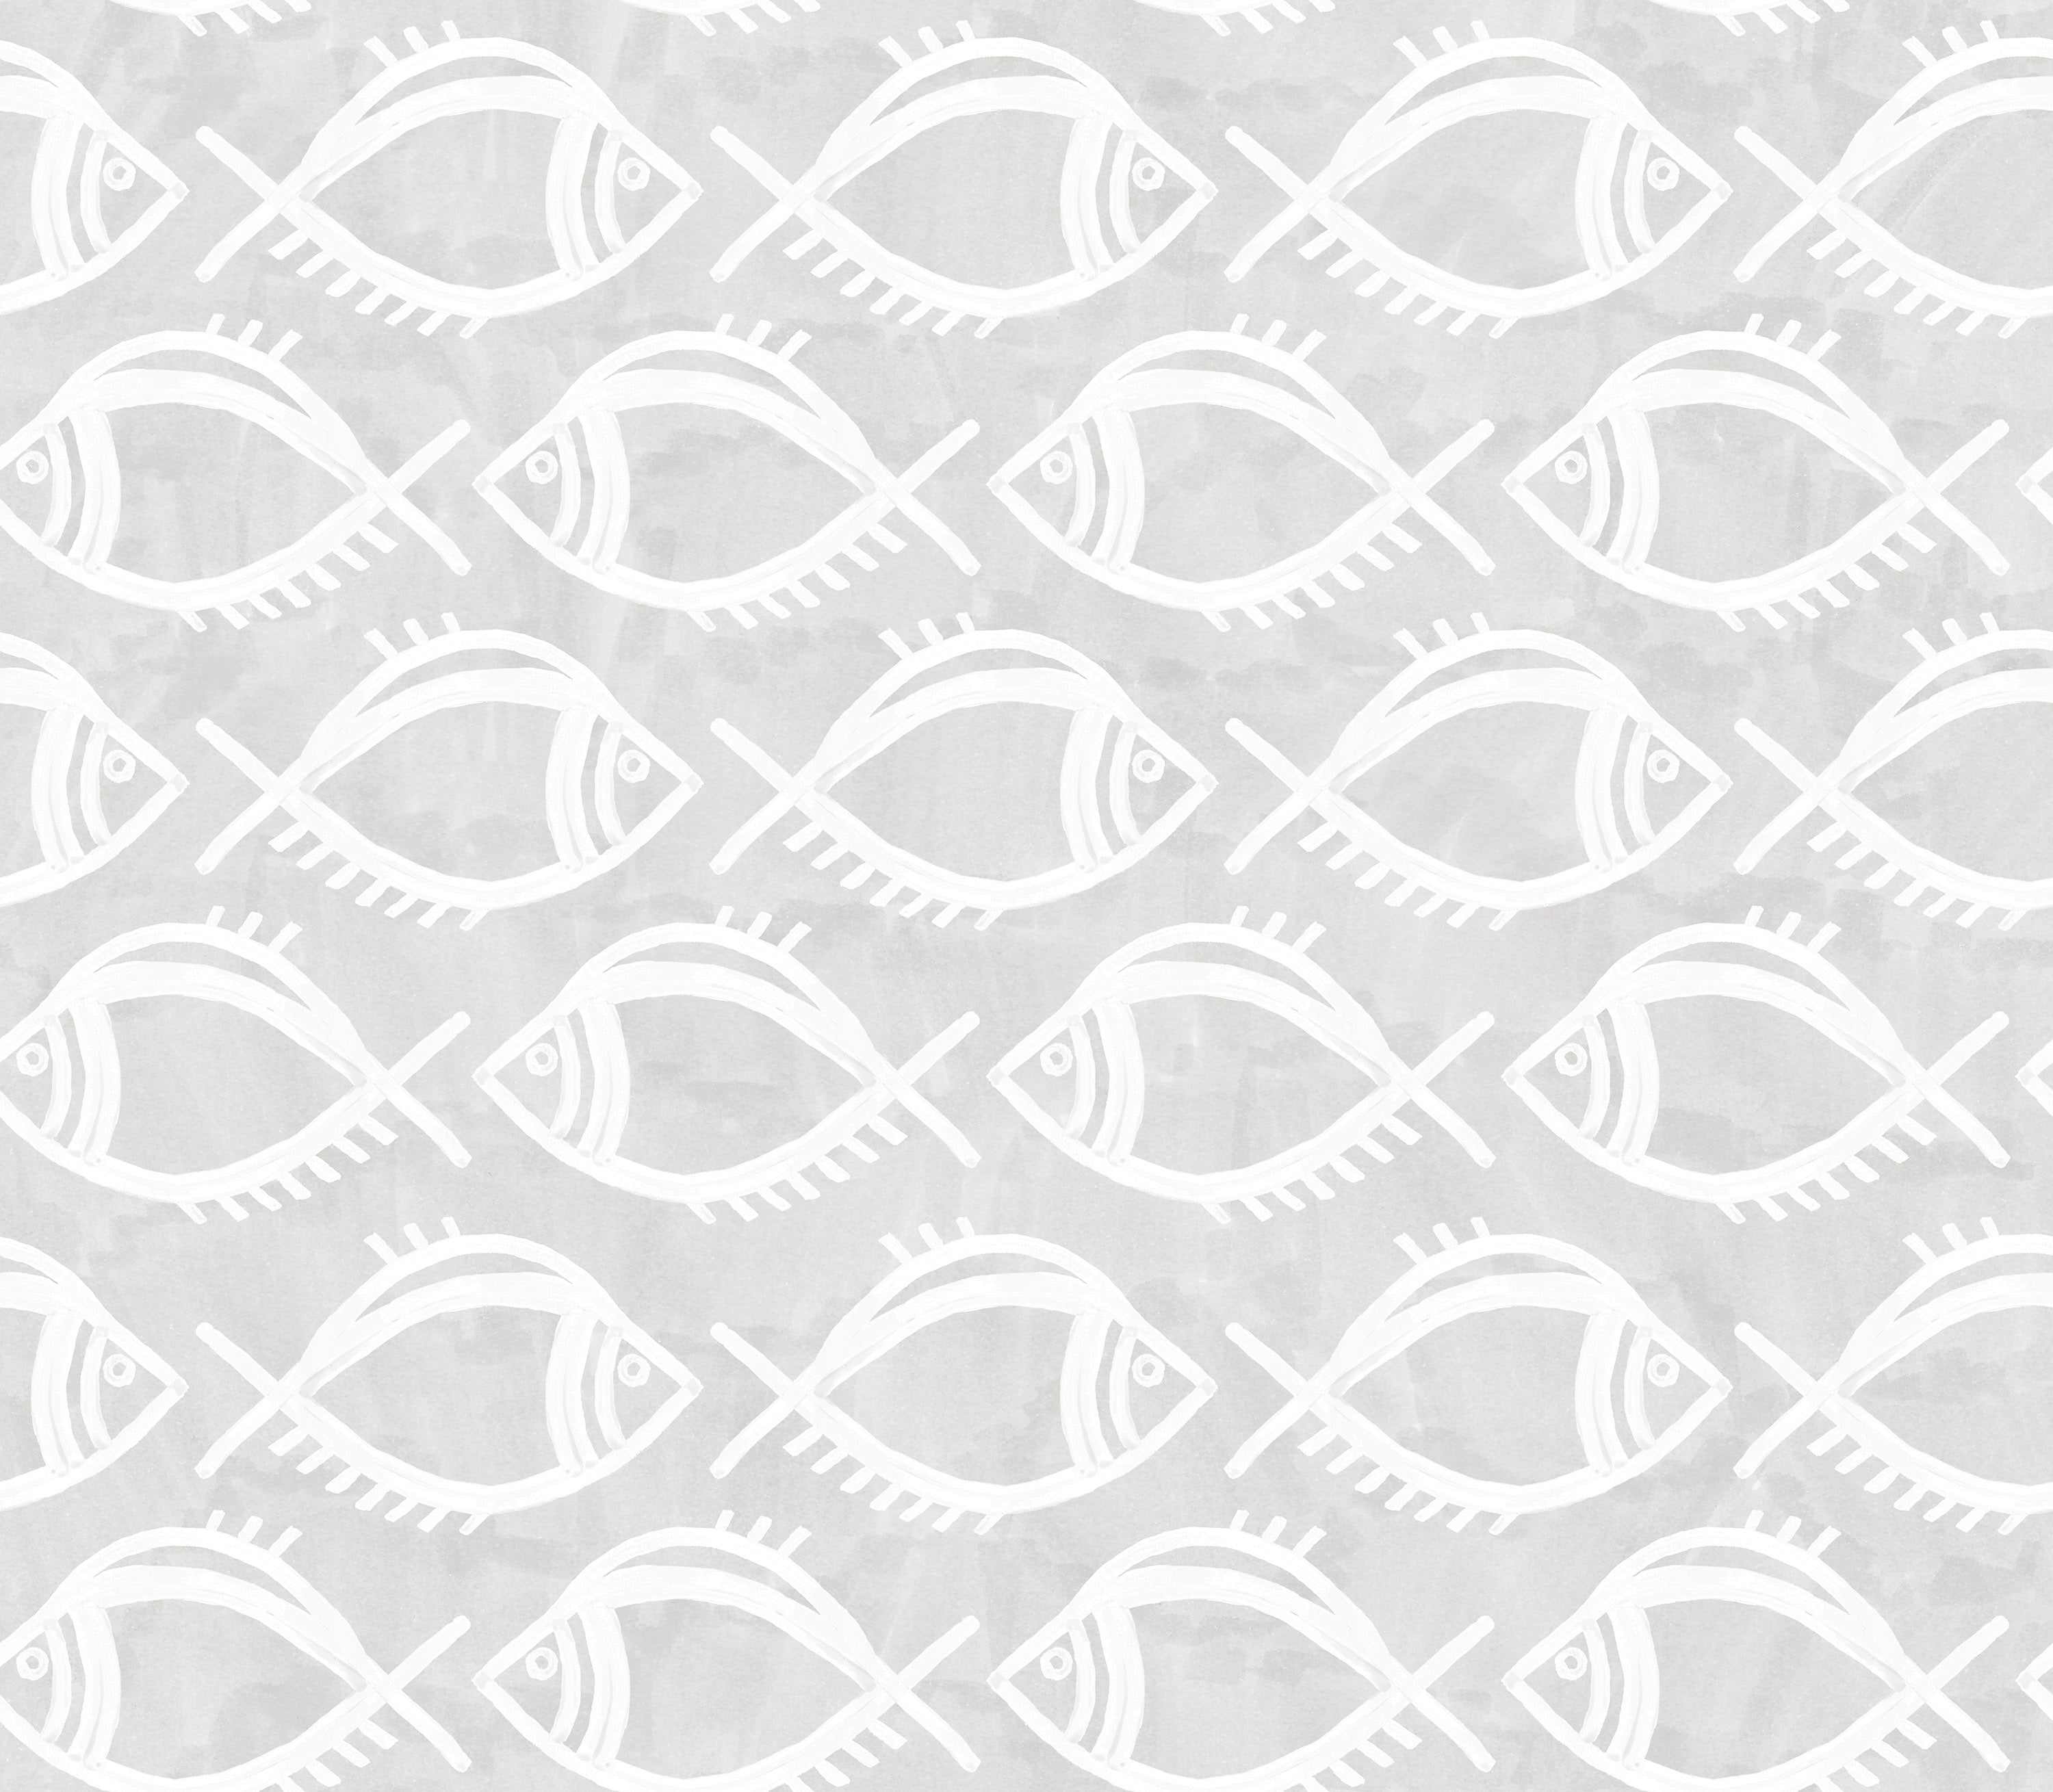 Detail of wallpaper in a playful fish print in white on a light gray field.